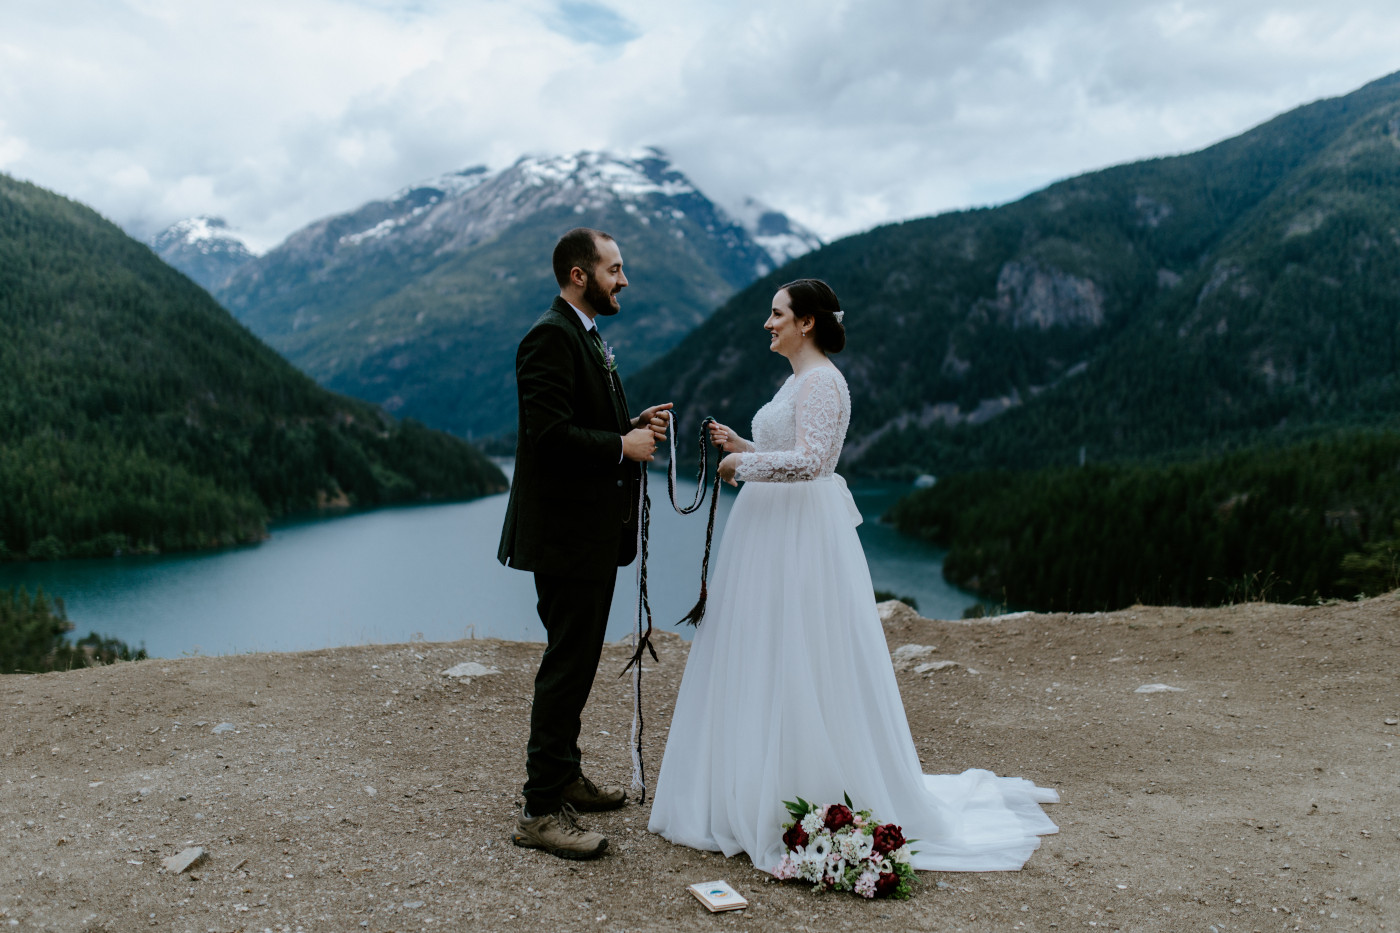 Elizabeth and Alex standing at Diablo Lake Overlook to begin the hand fastening. Elopement photography at North Cascades National Park by Sienna Plus Josh.